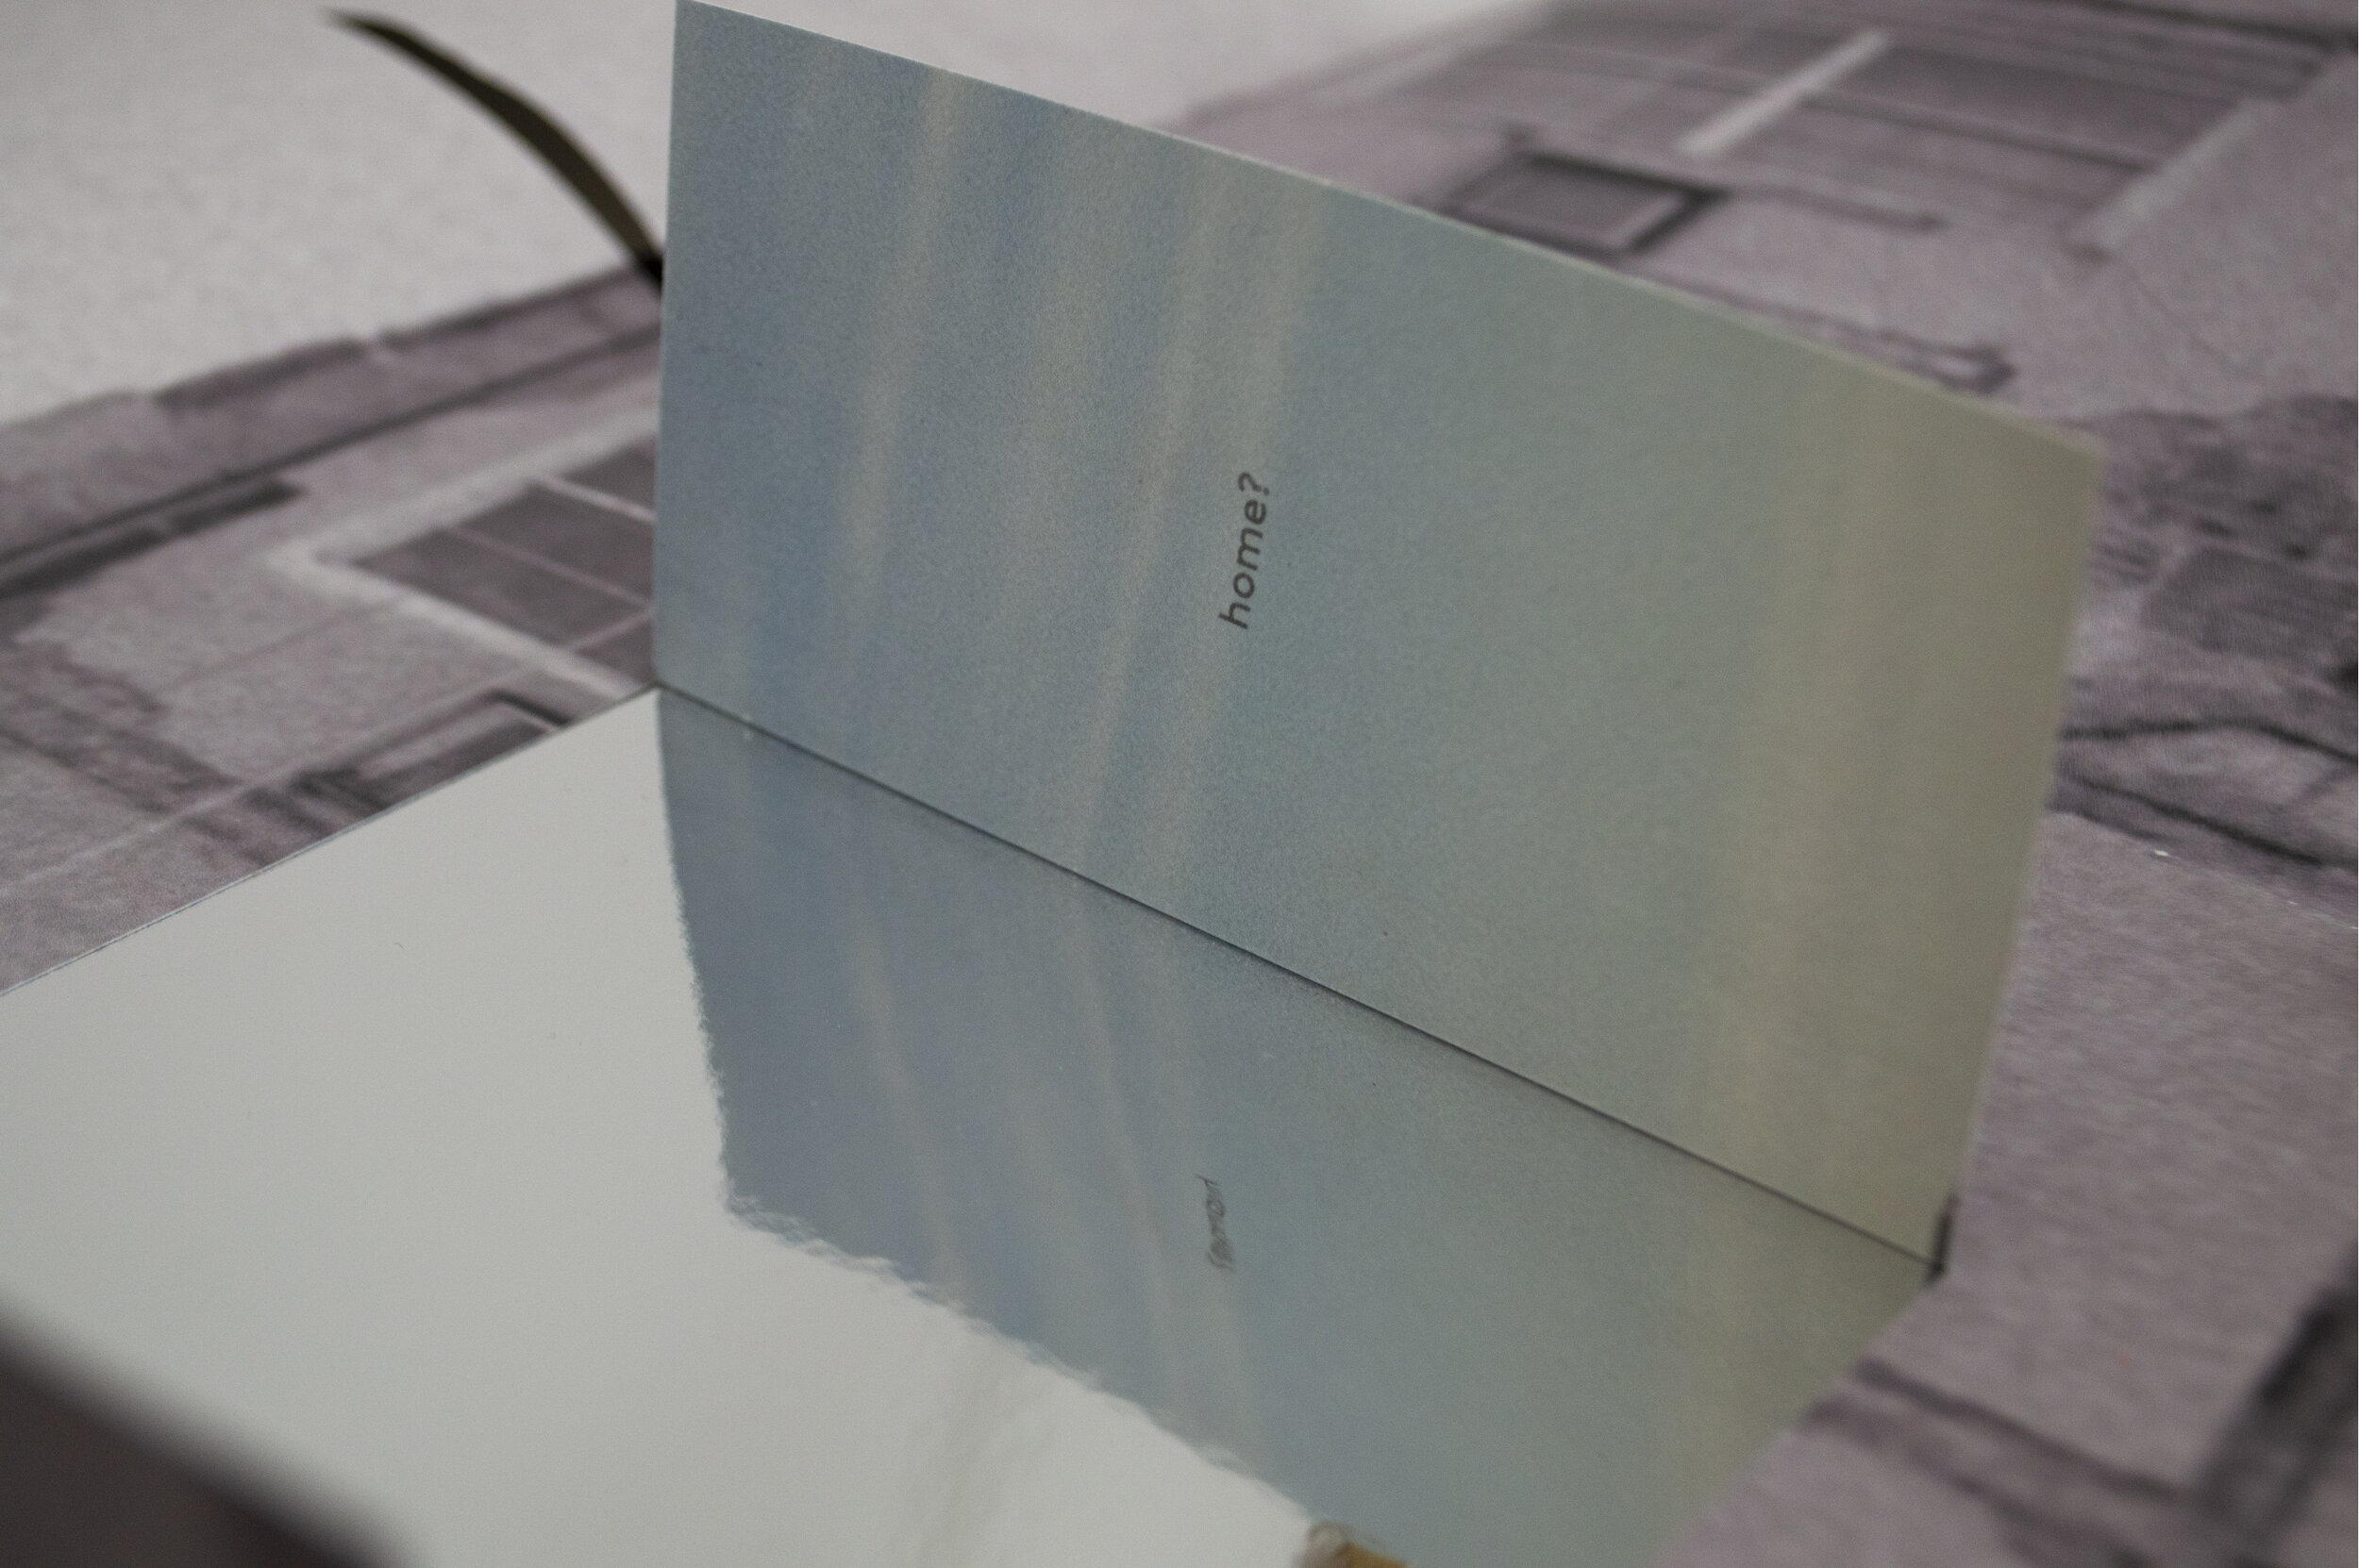  Artist book  Alternative Realities  (detail), photo by Amanda Linares, 2020. Courtesy of the artist. 